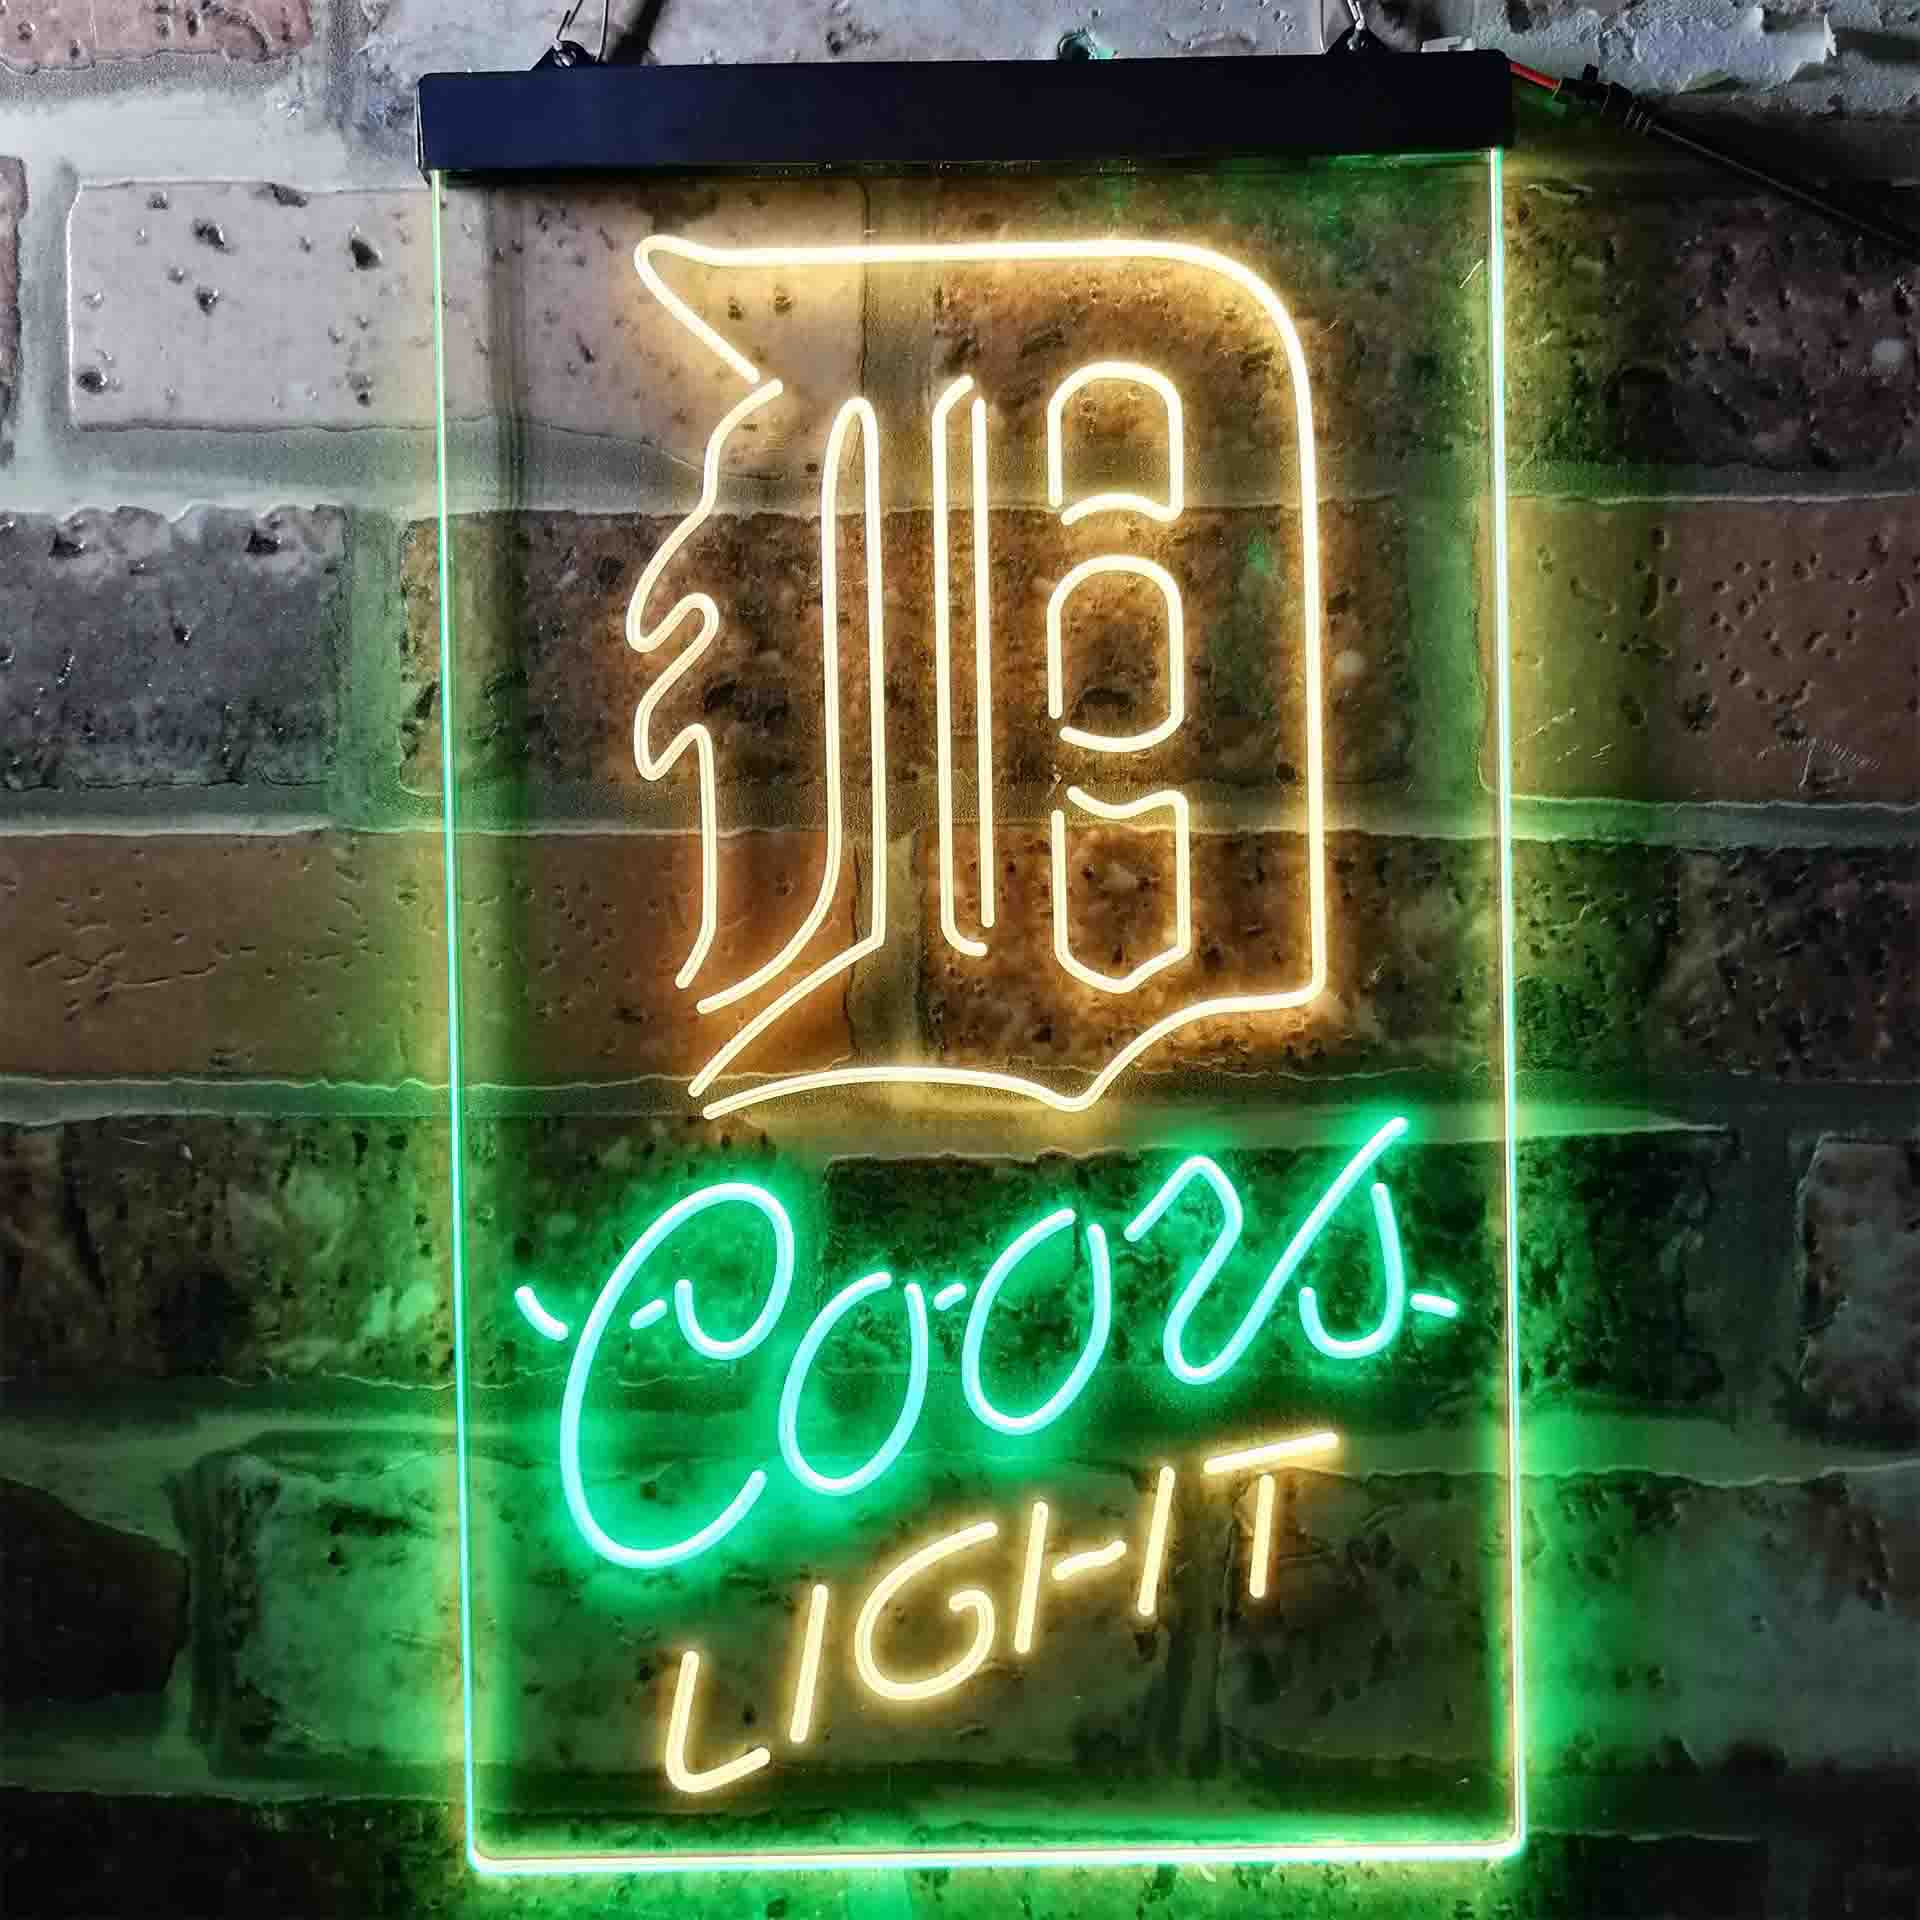 Detroit Tigers Coors Light Neon-Like LED Sign